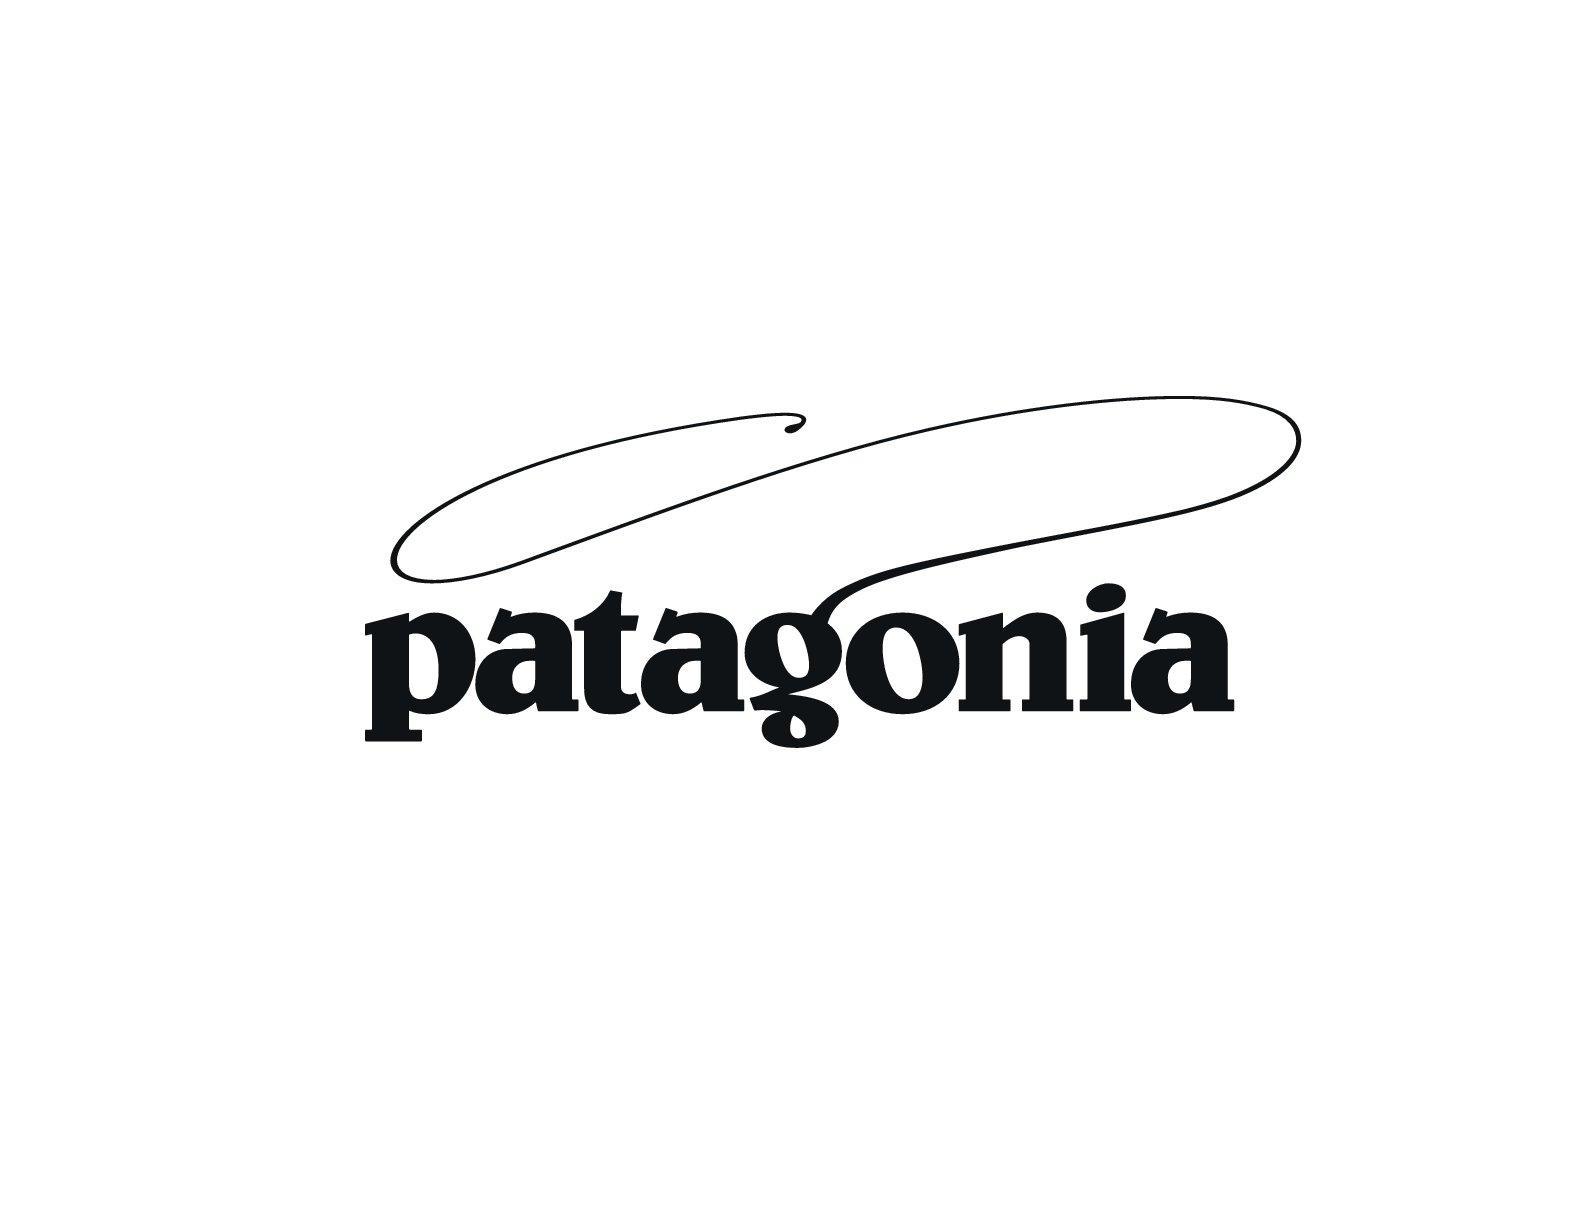 Patagonia Fish Logo - Patagonia Waders and Packs - now in stock - RiverFly 1864 - river ...